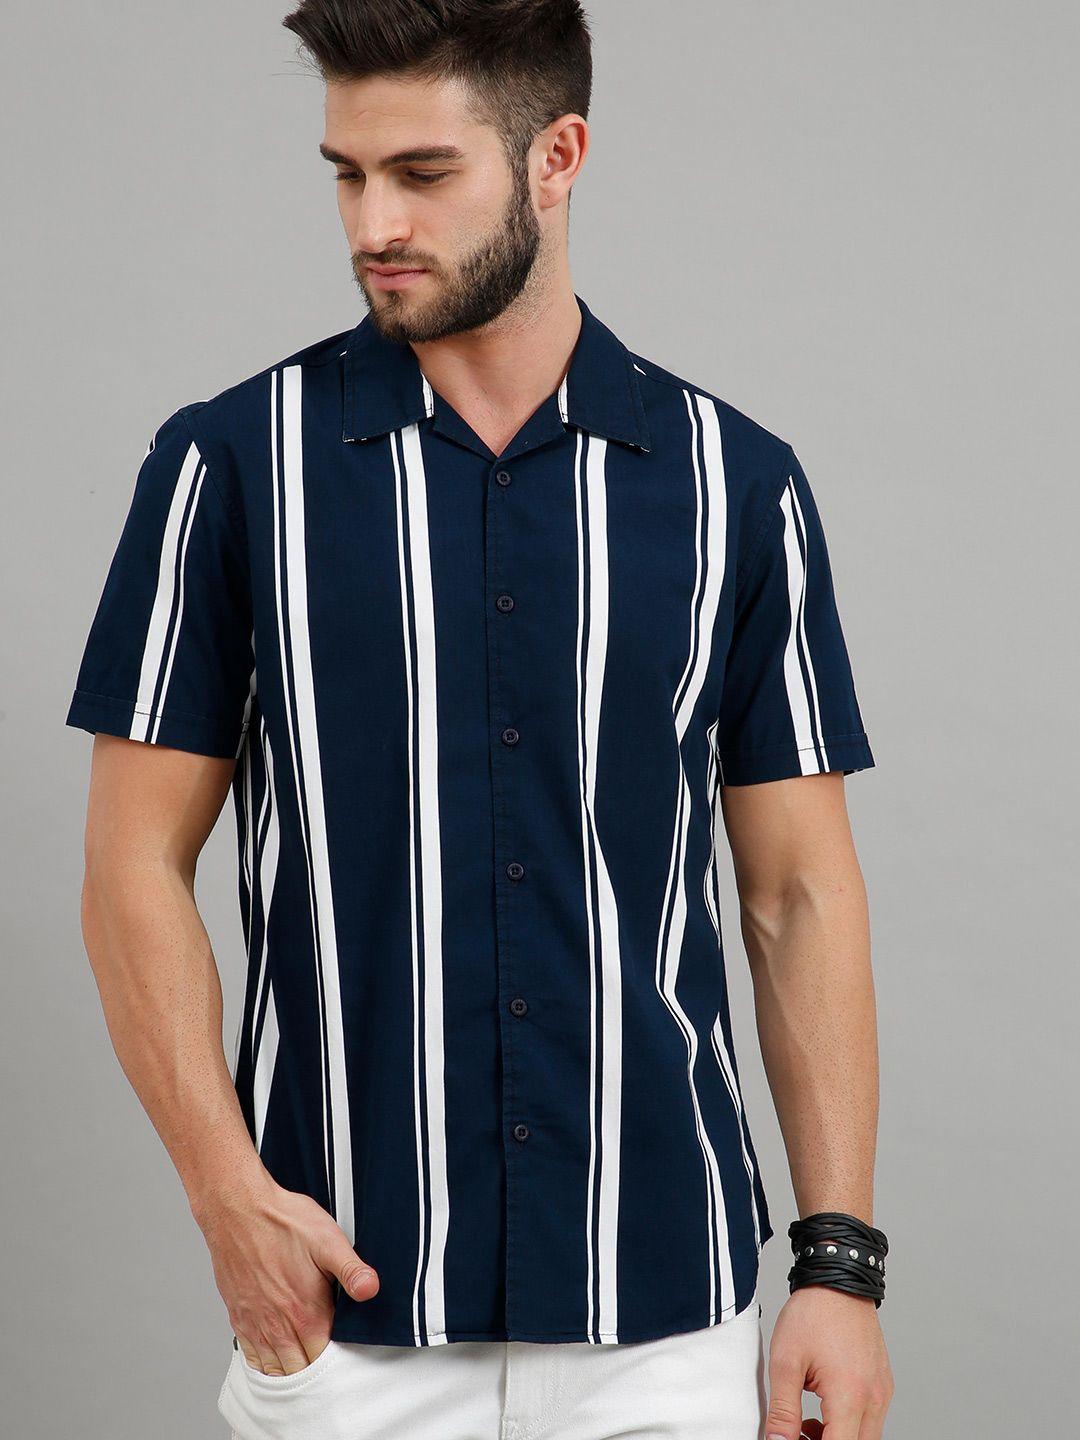 here&now-men-navy-blue-&-white-slim-fit-striped-casual-shirt